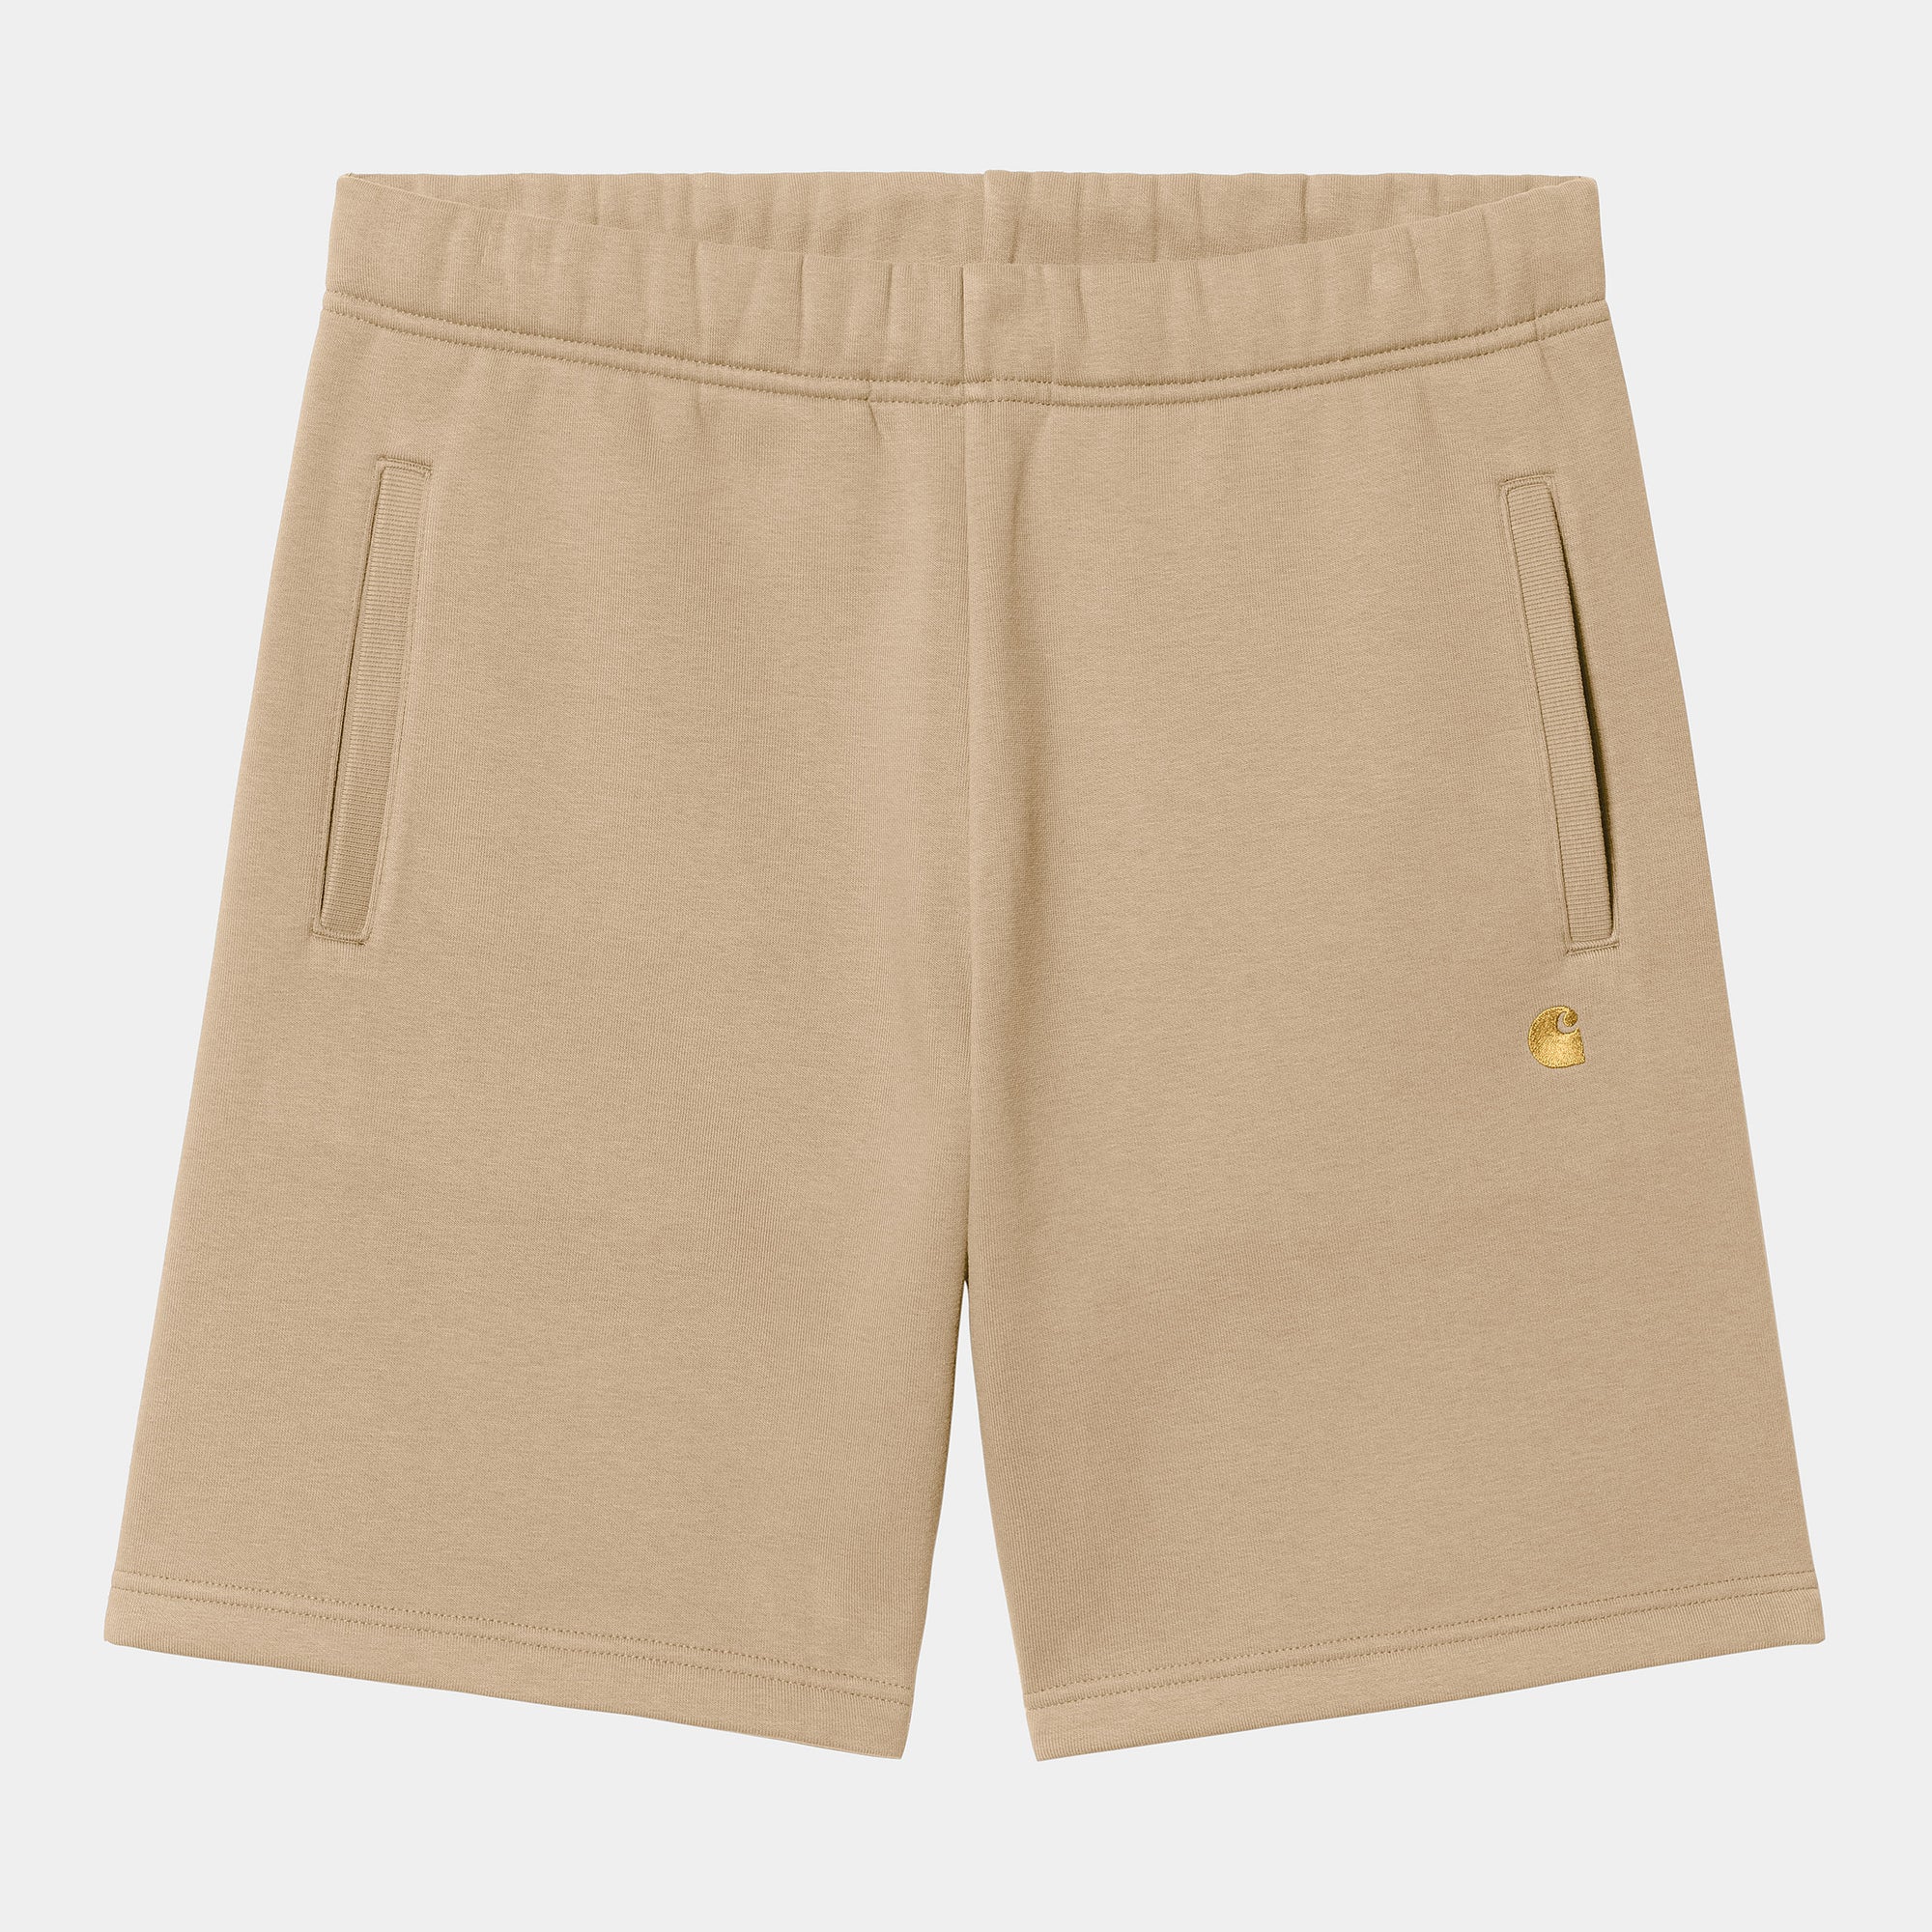 Carhartt WIP Chase Sweat Short - Sable / Gold